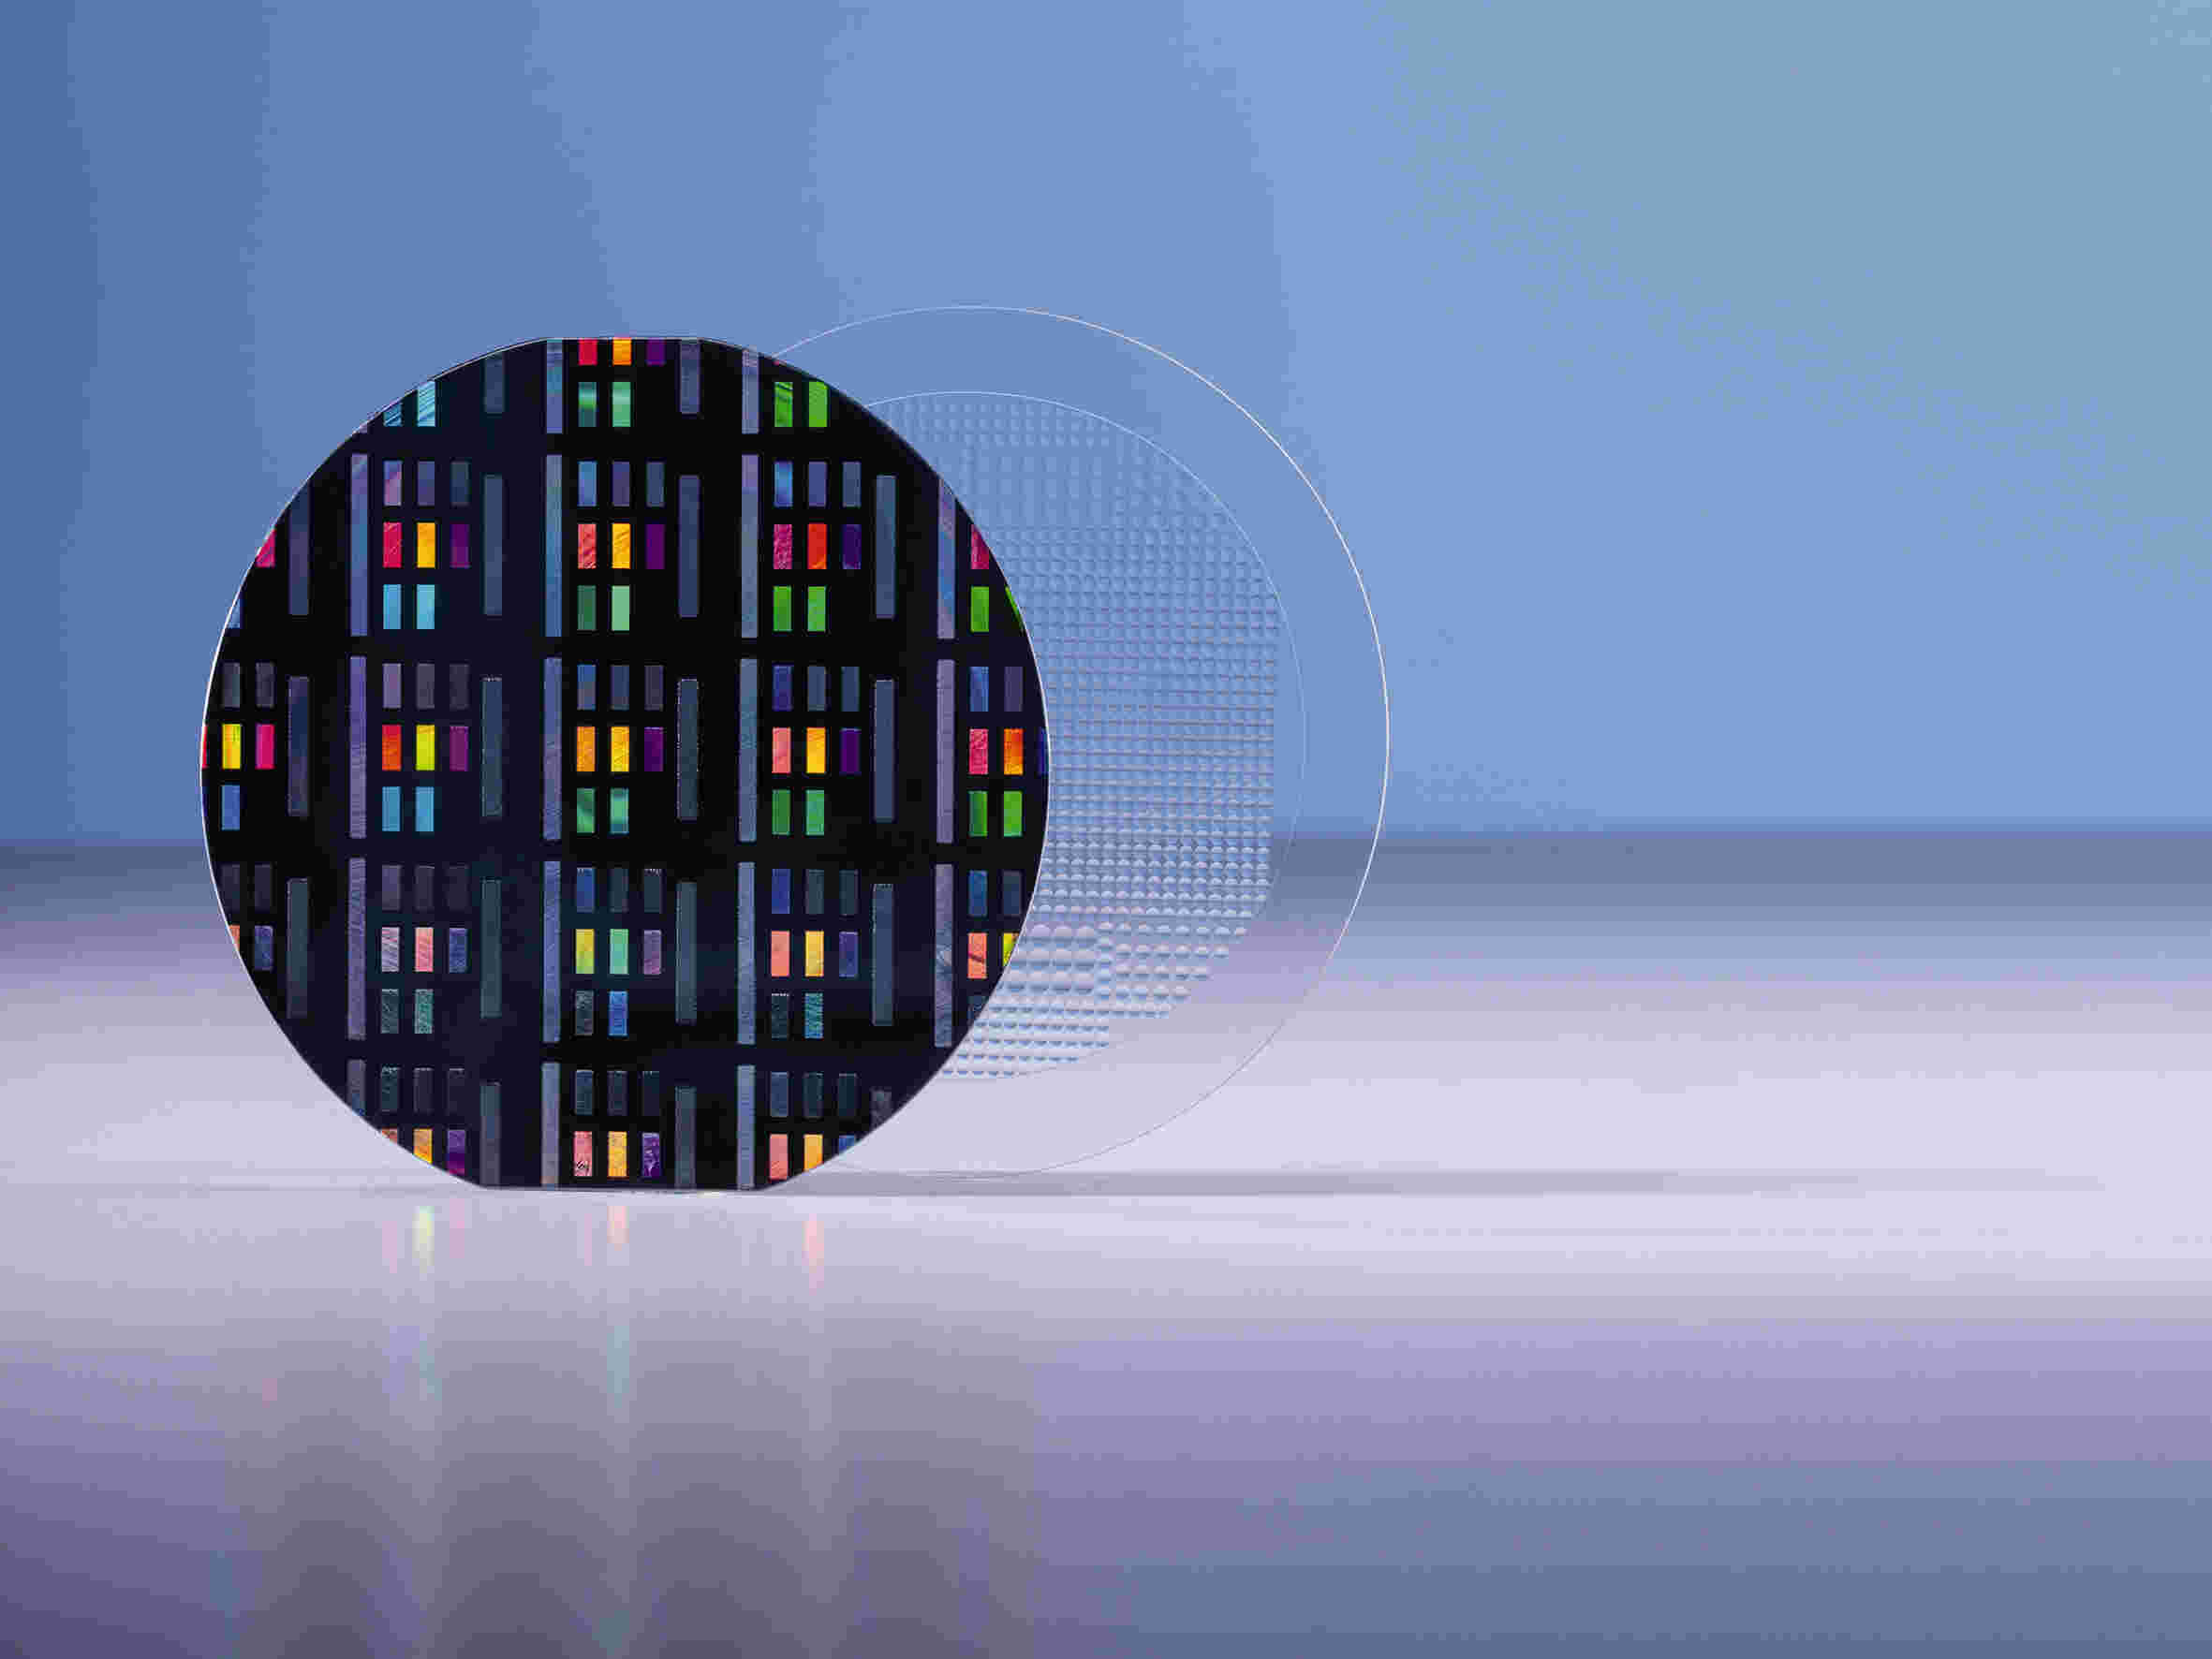 Wafer-level nanoimprint lithography (left) and lens molding (right) enable small-form-factor and high-resolution optical sensors for applications such as 3D sensing. Image courtesy of DELO.